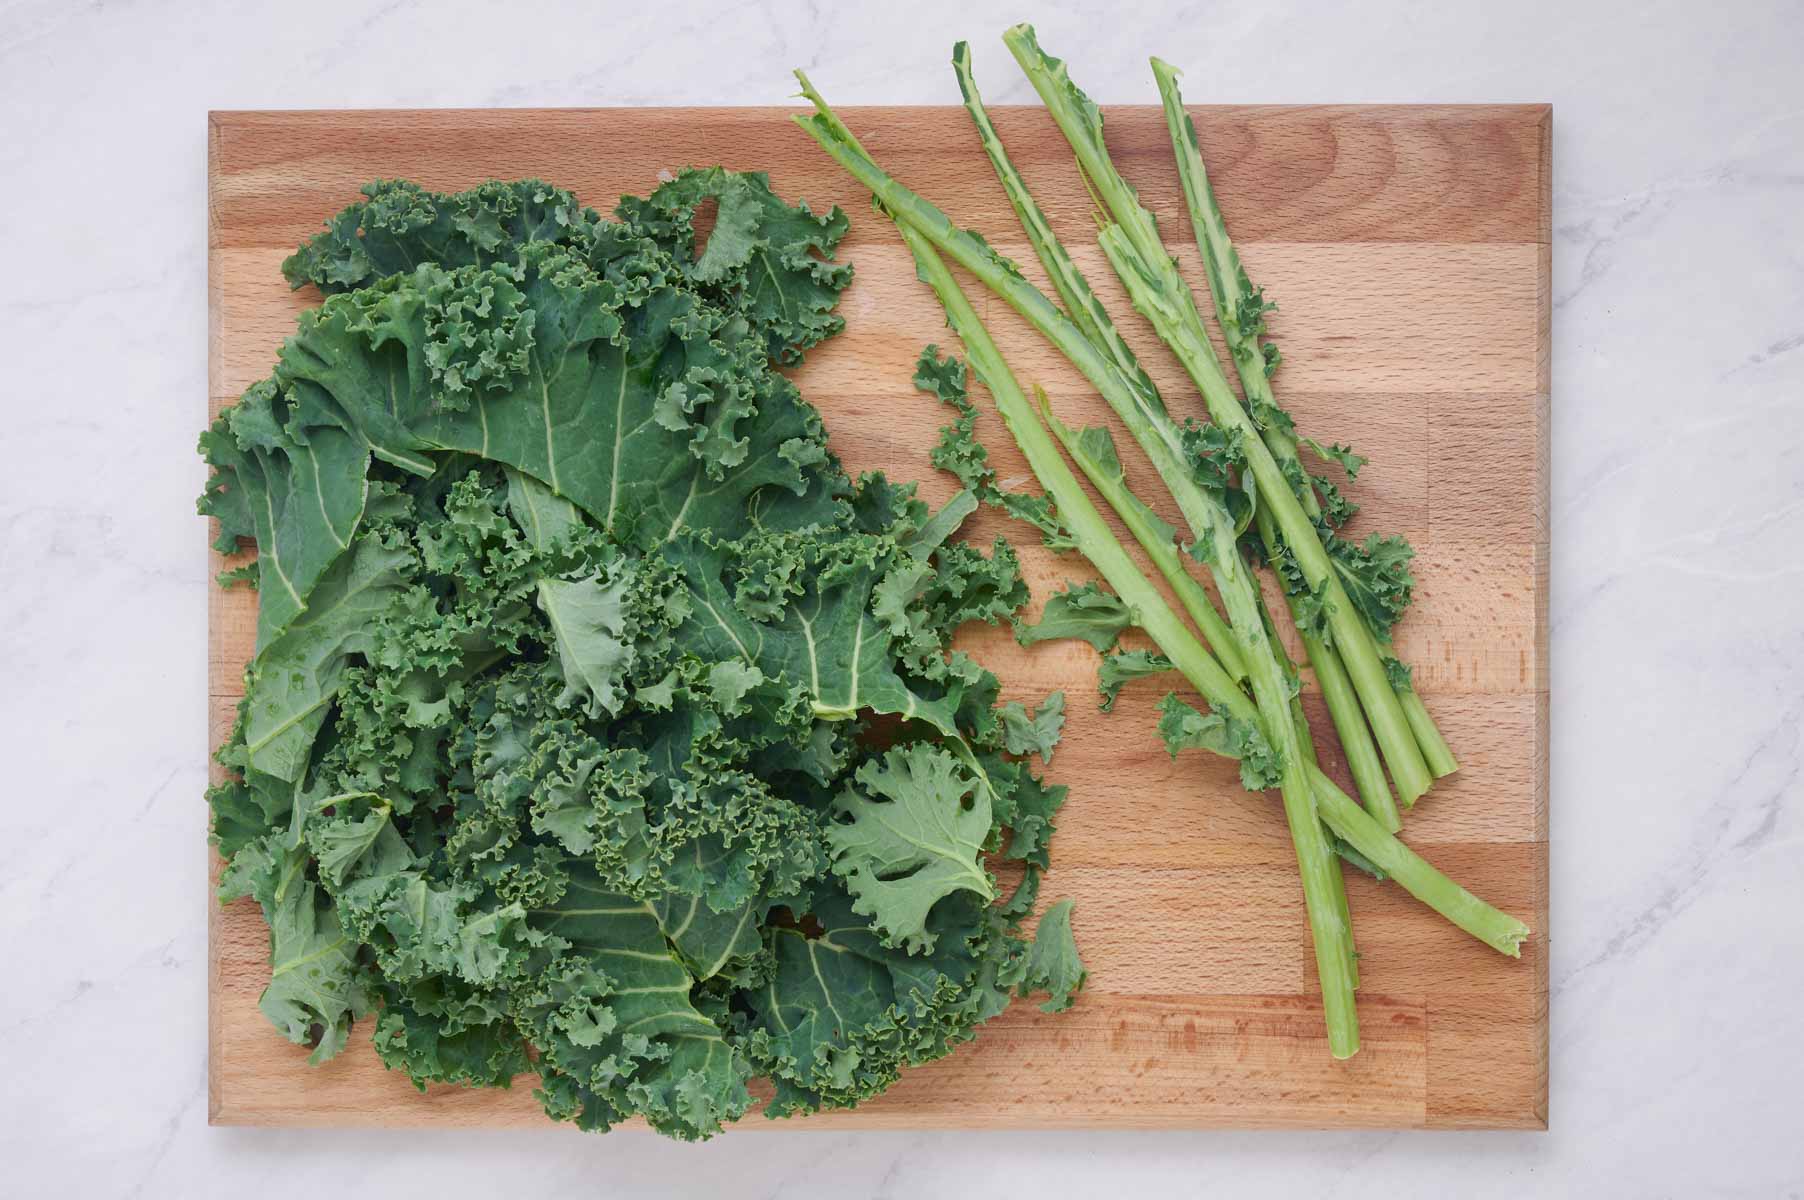 Kale leaves are removed from the stem.